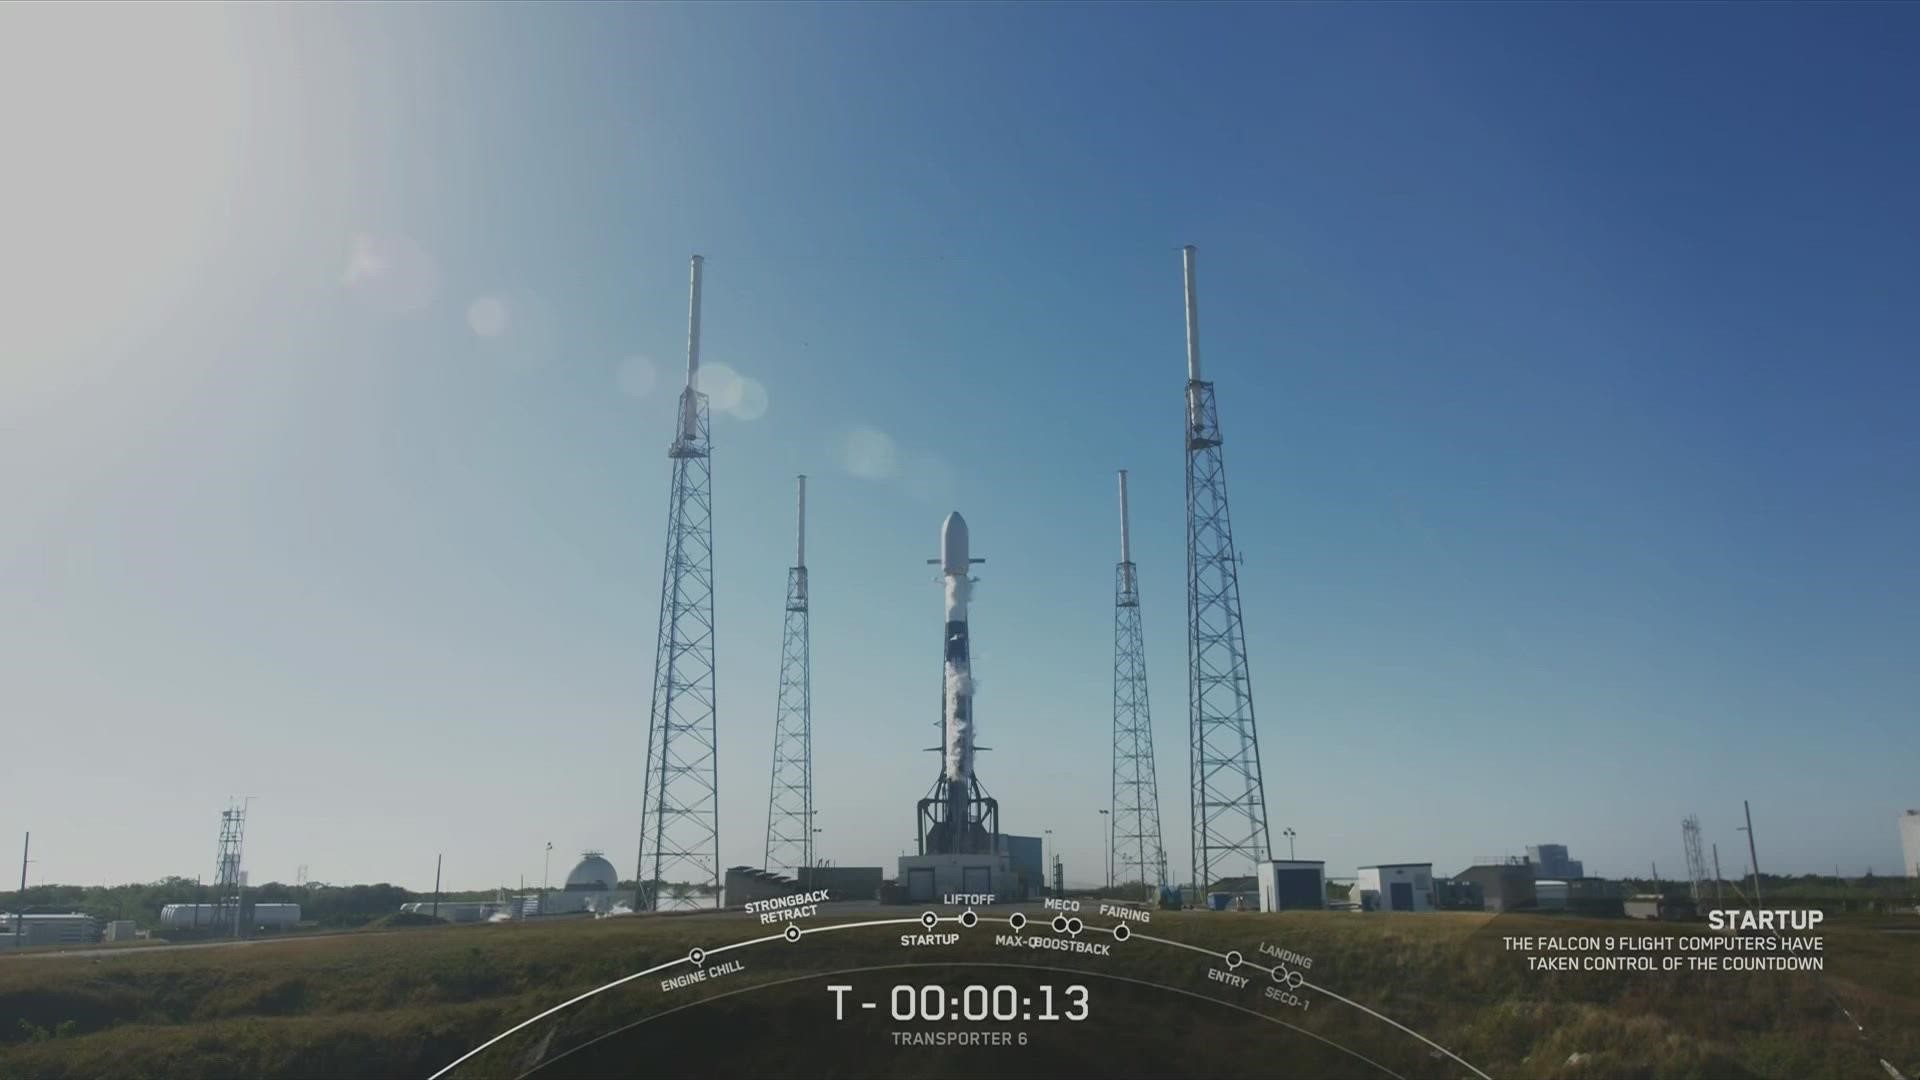 Liftoff at the Cape Canaveral Space Force Station has been pushed back to 2:14 p.m. Monday.